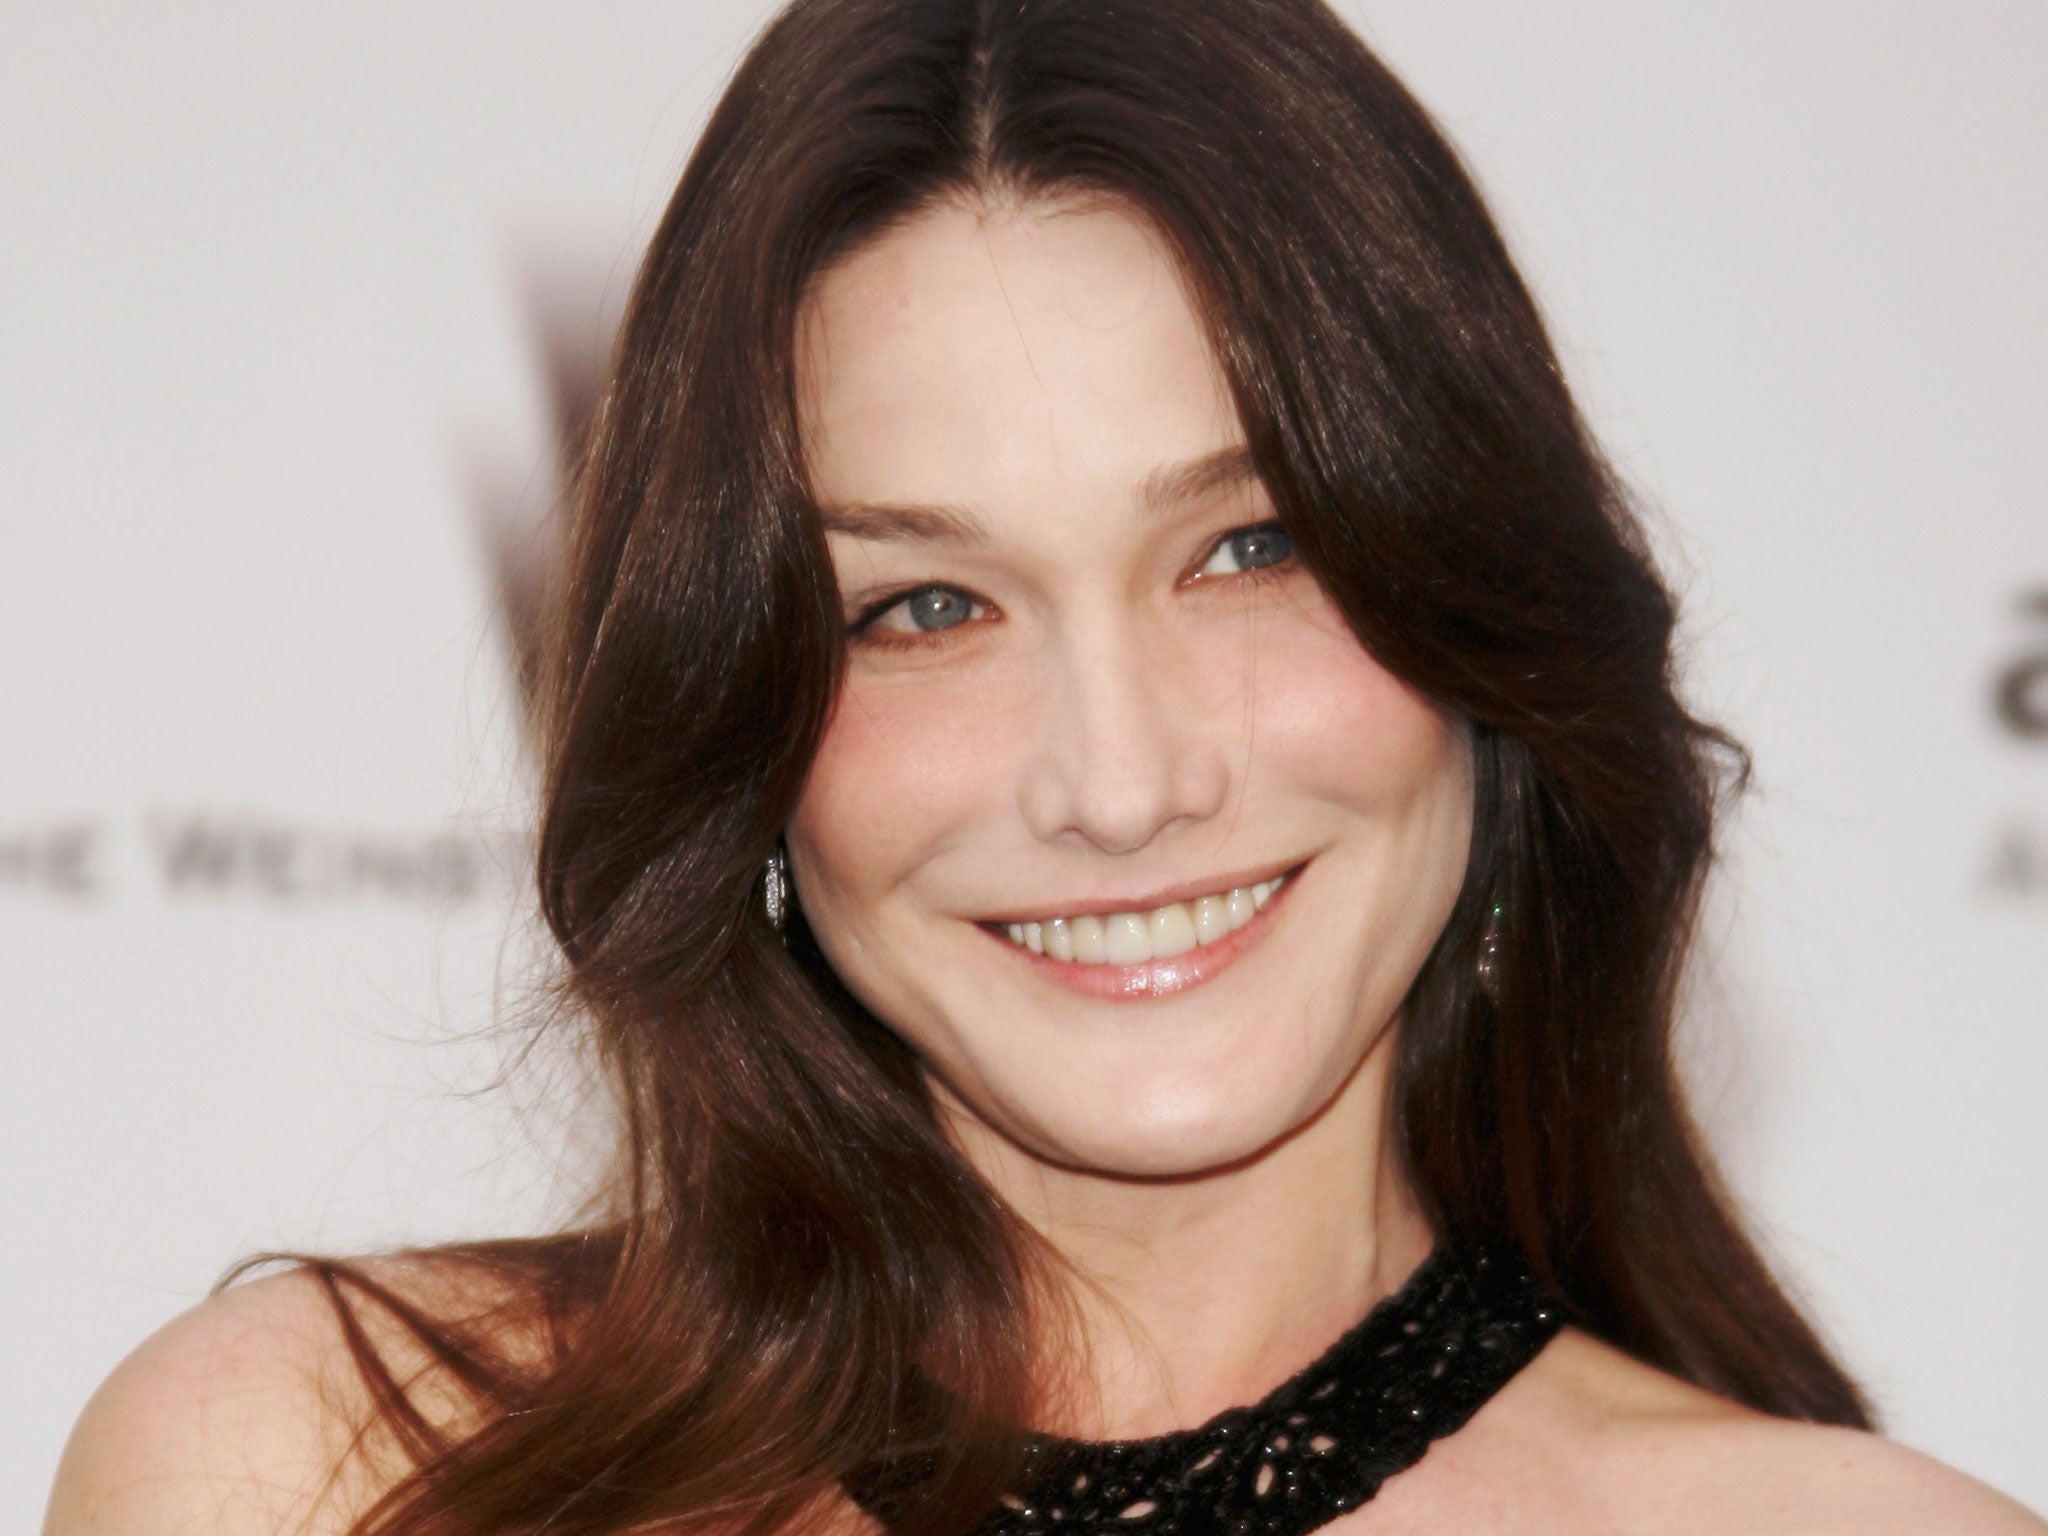 The promise of nude pictures of former French first lady Carla Bruni was used by hackers as bait to snare dozens of diplomats attending the G20 summit in Paris in 2011 it has emerged.